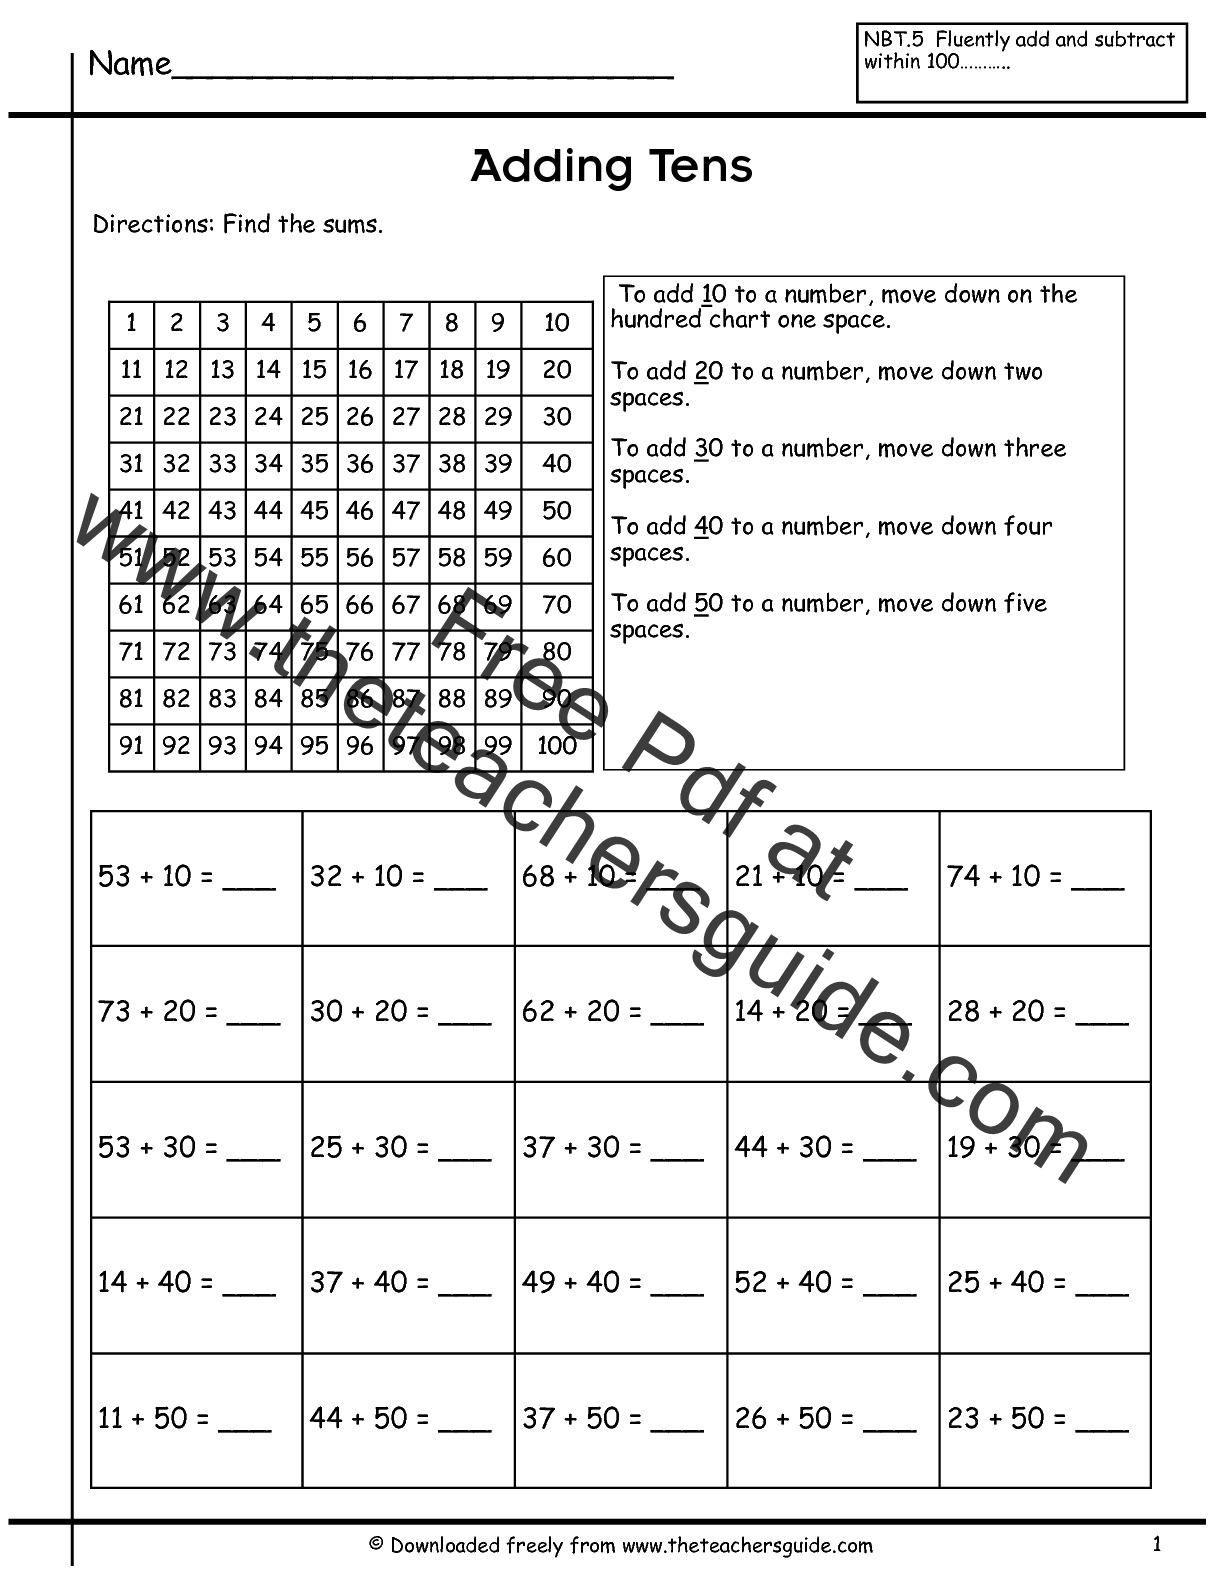 Two Digit Addition Worksheets from The Teacher's Guide